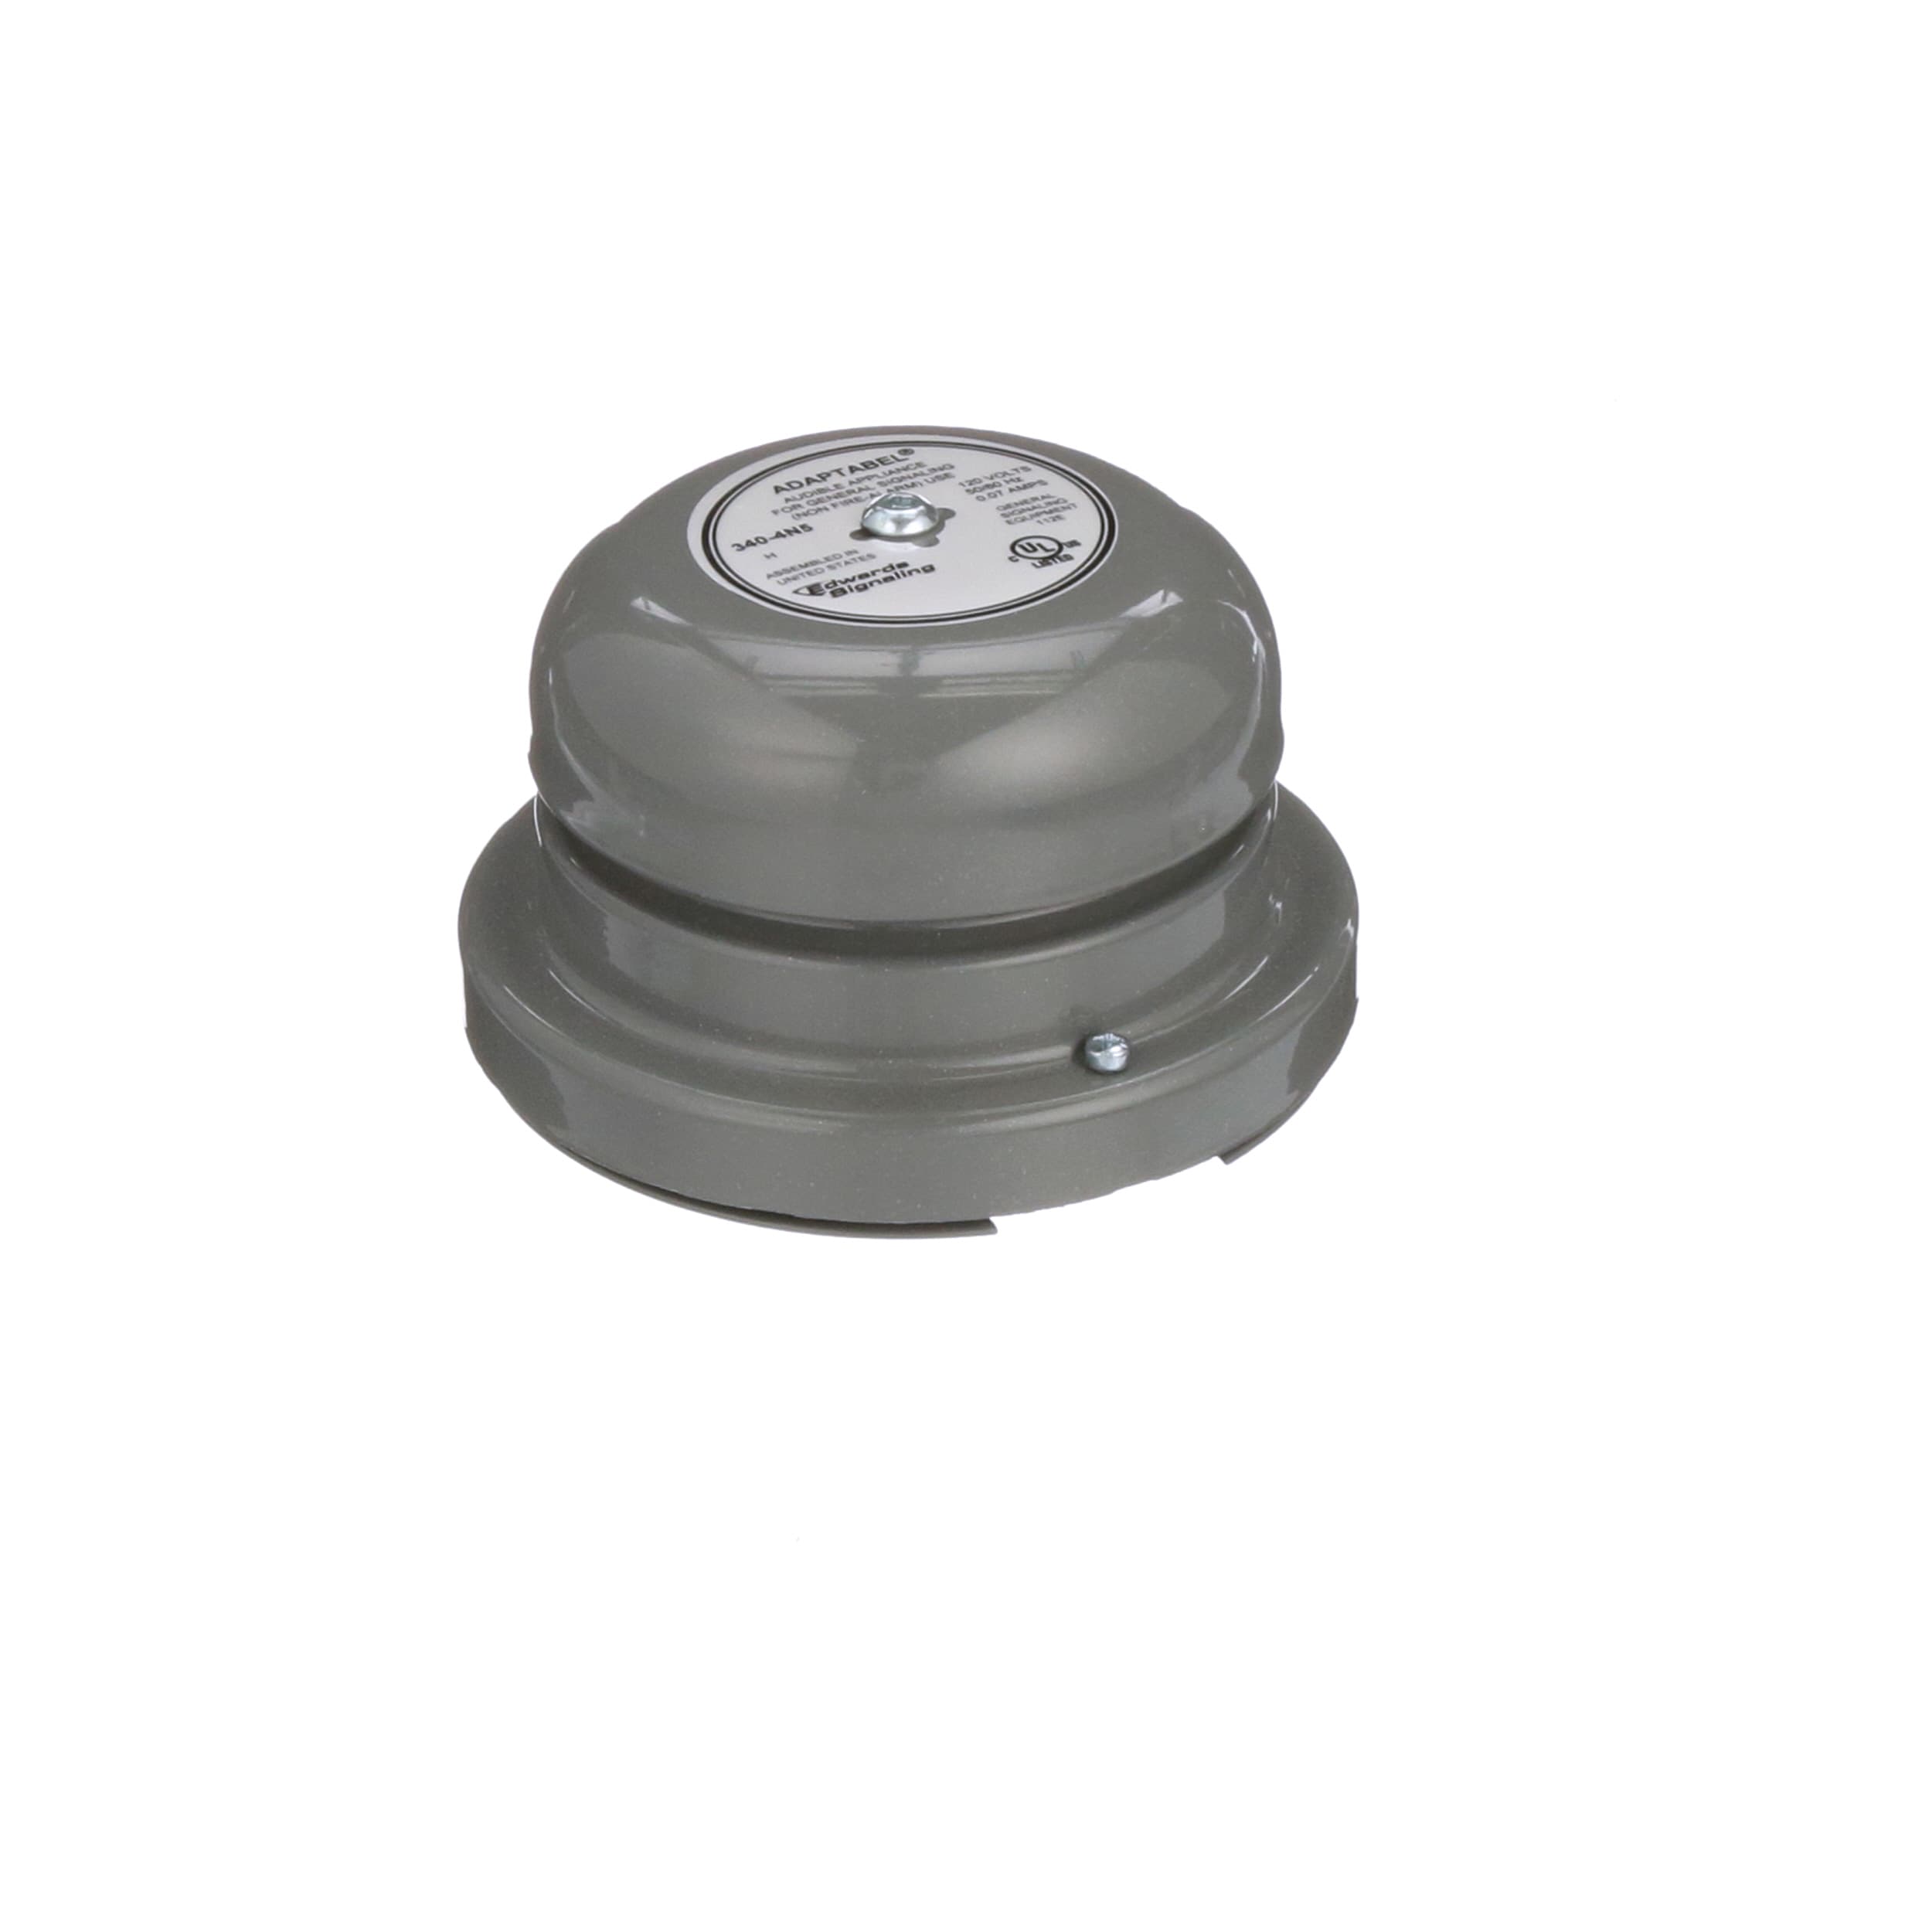 MODEL NO. 340-4N5 4" Details about   ADAPTABEL VIBRATING BELL 